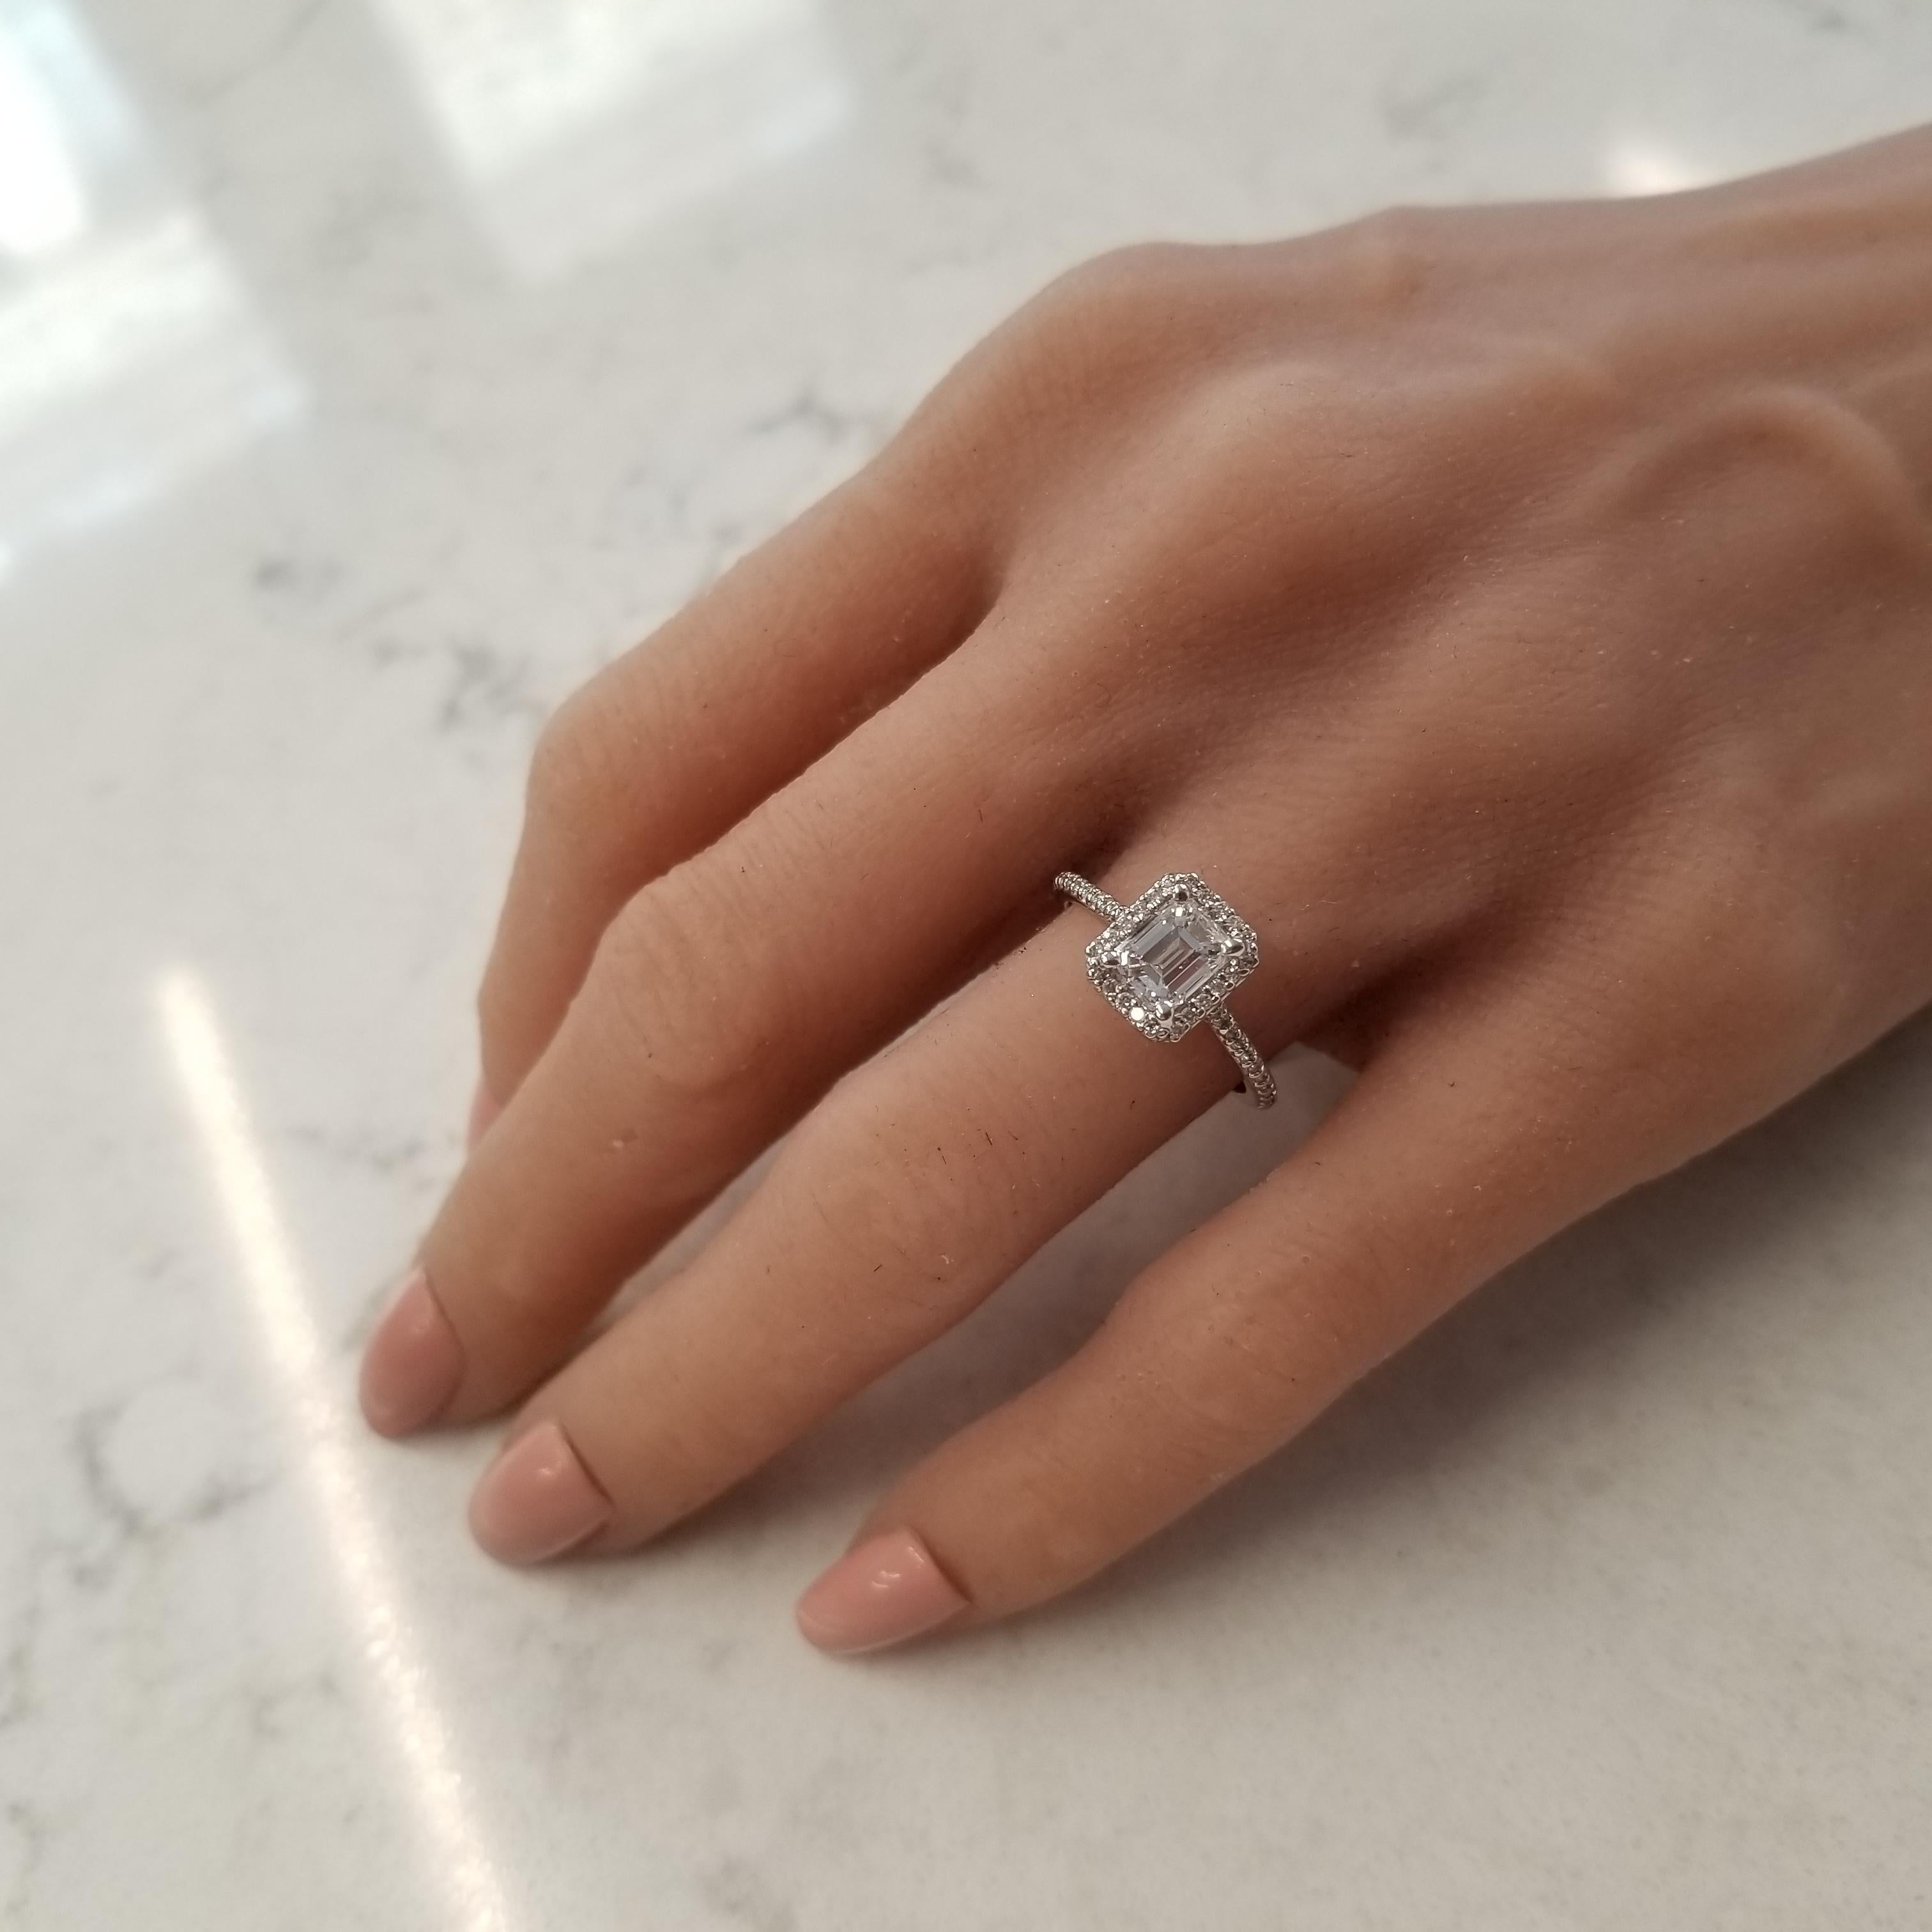 This stunning halo engagement ring is the one you seek. 1.04 carat emerald cut diamond with E color and VS1 clarity in a gorgeous classic prong setting is the center.  A total of 57 round brilliant cut diamonds adorn this center stone in a halo